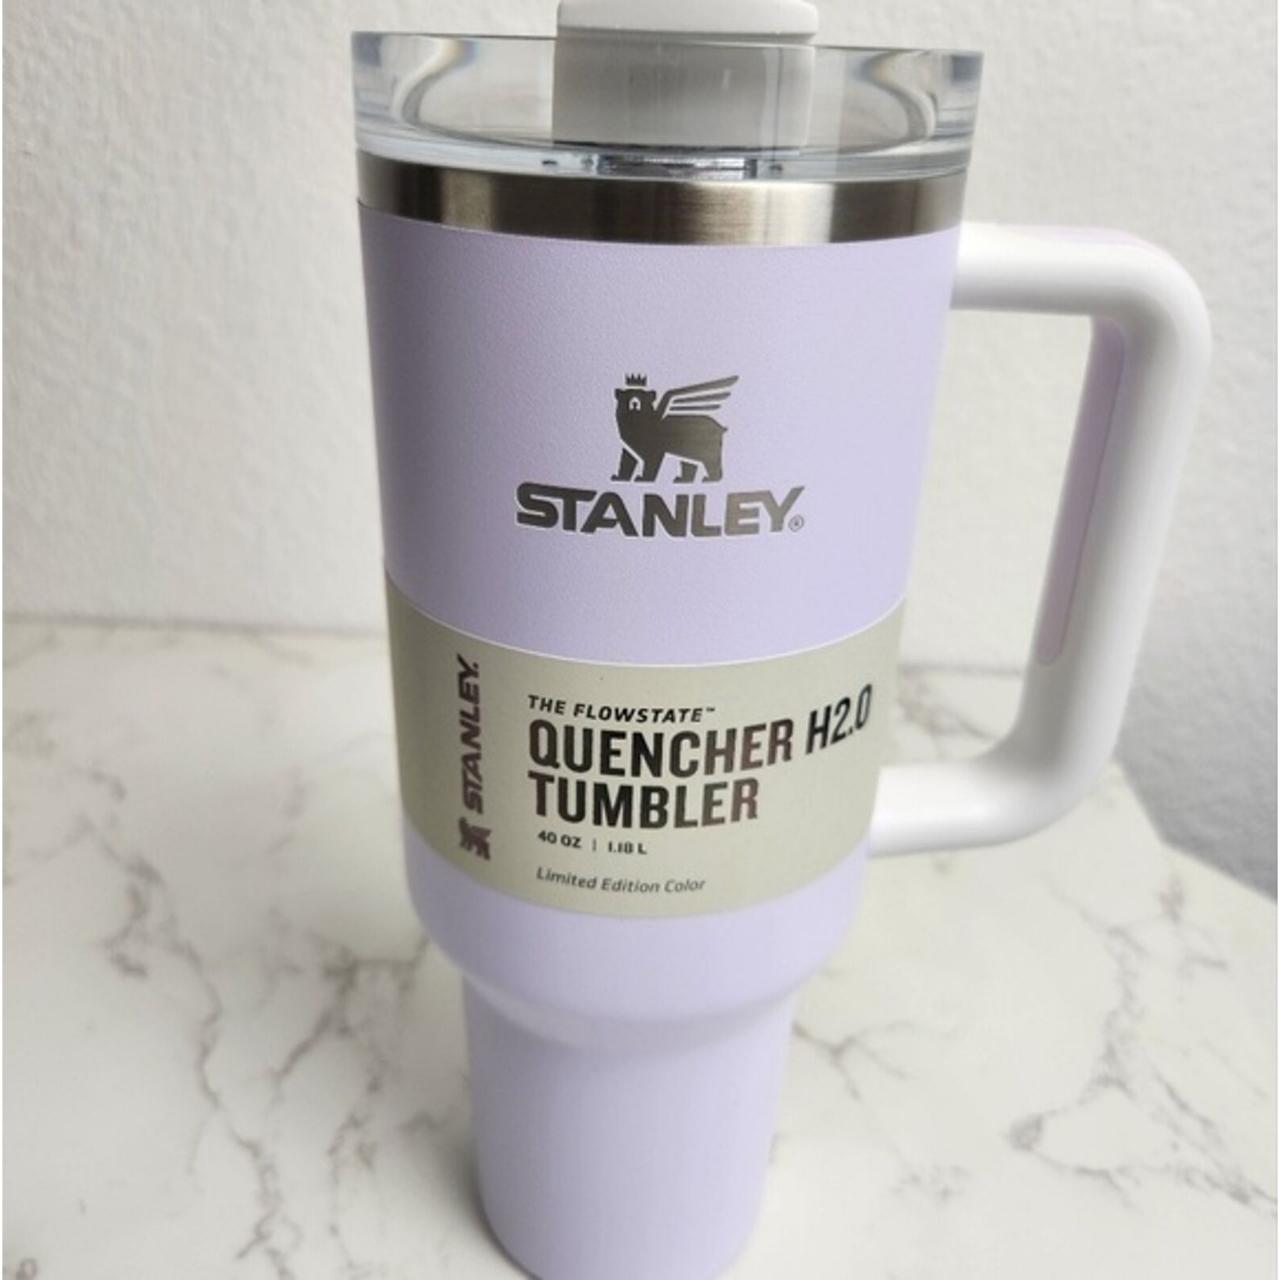 Limited Edition Stanley Quencher Tumbler 40 oz - Wisteria (Purple